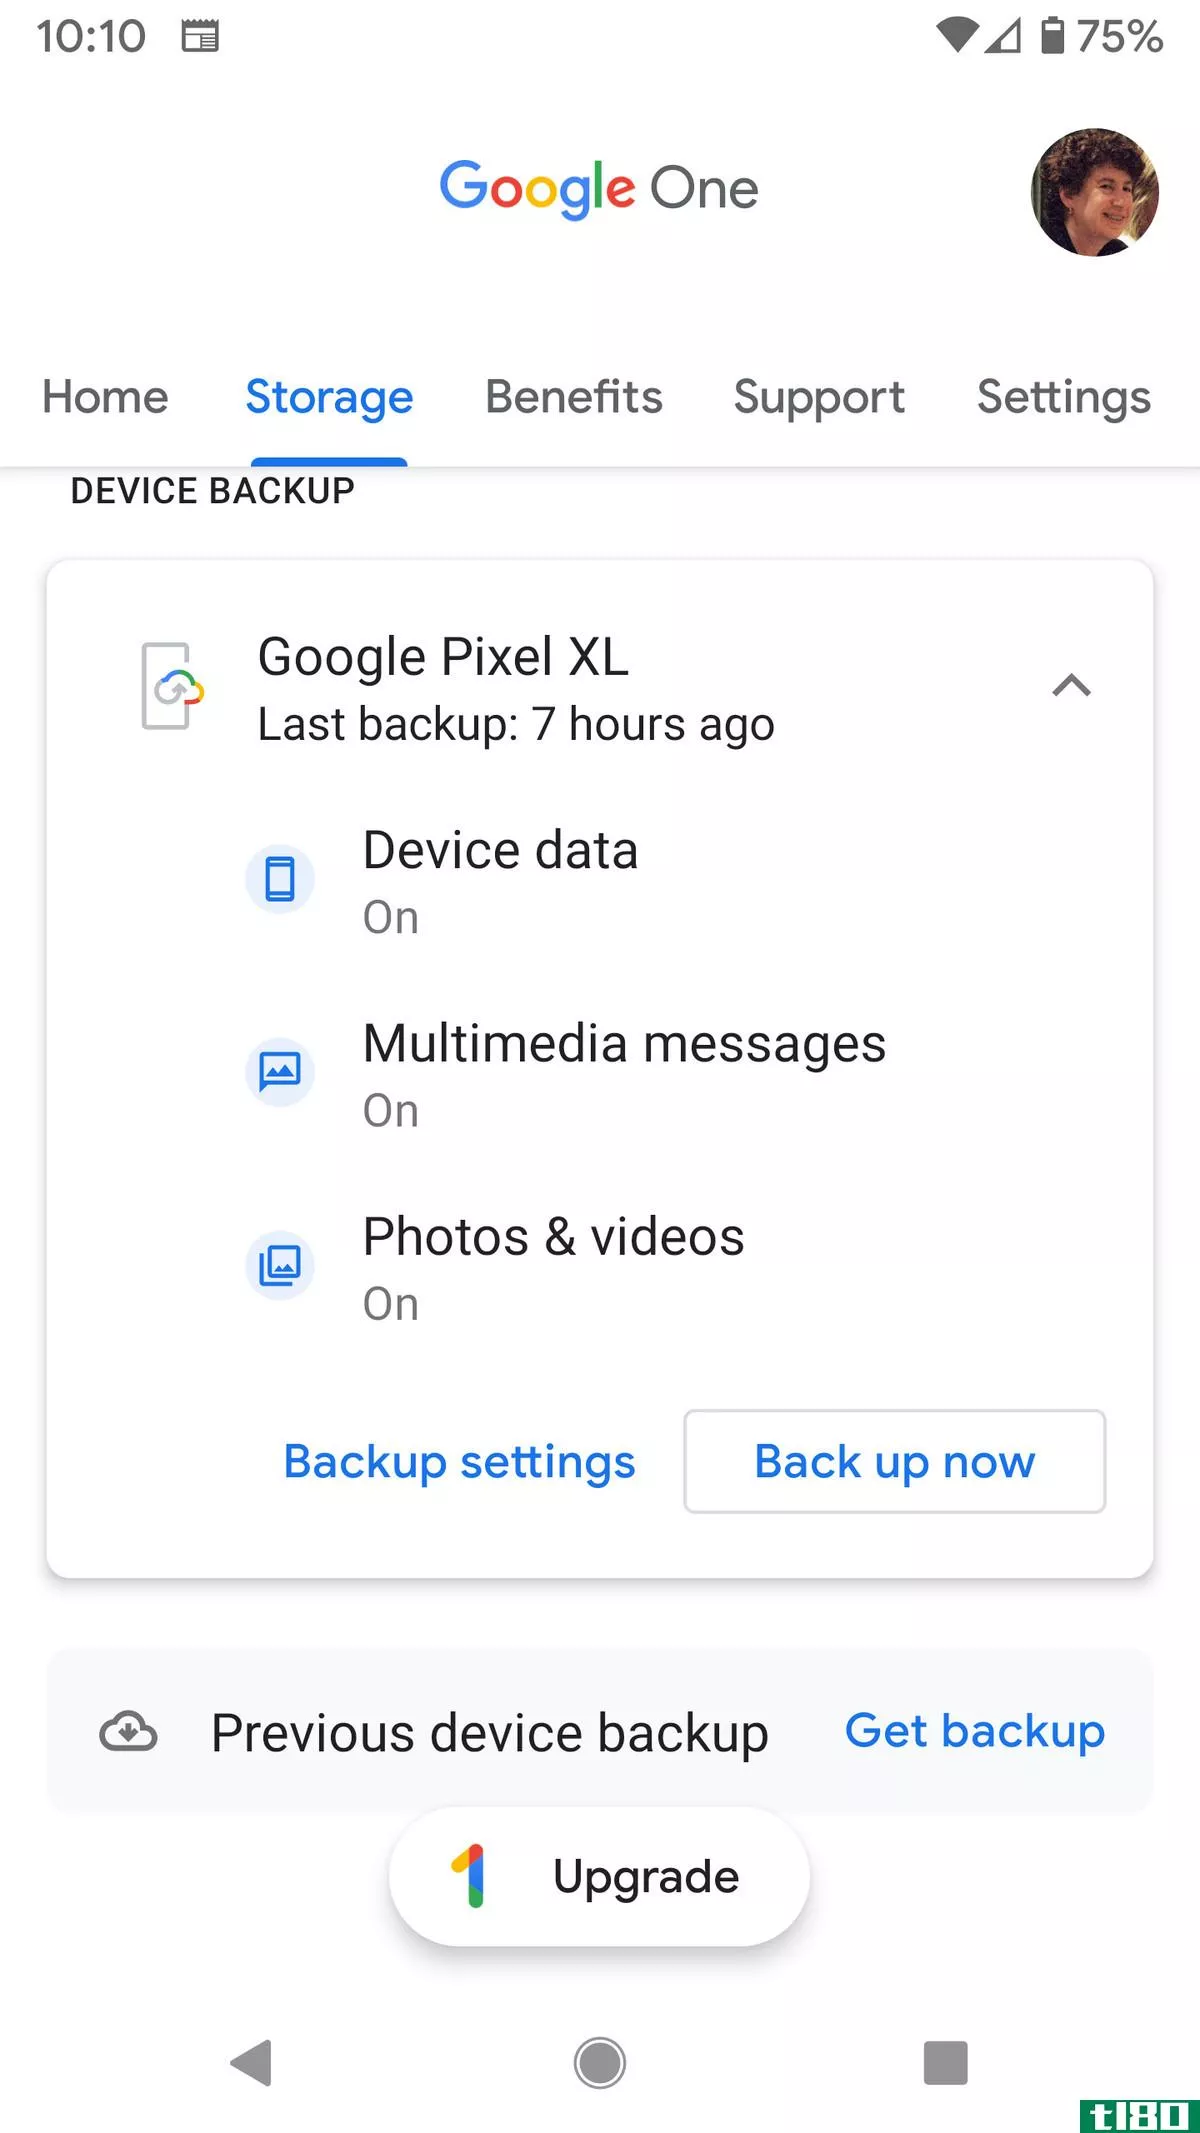 Select the “Storage” tab and tap on “Back up now”